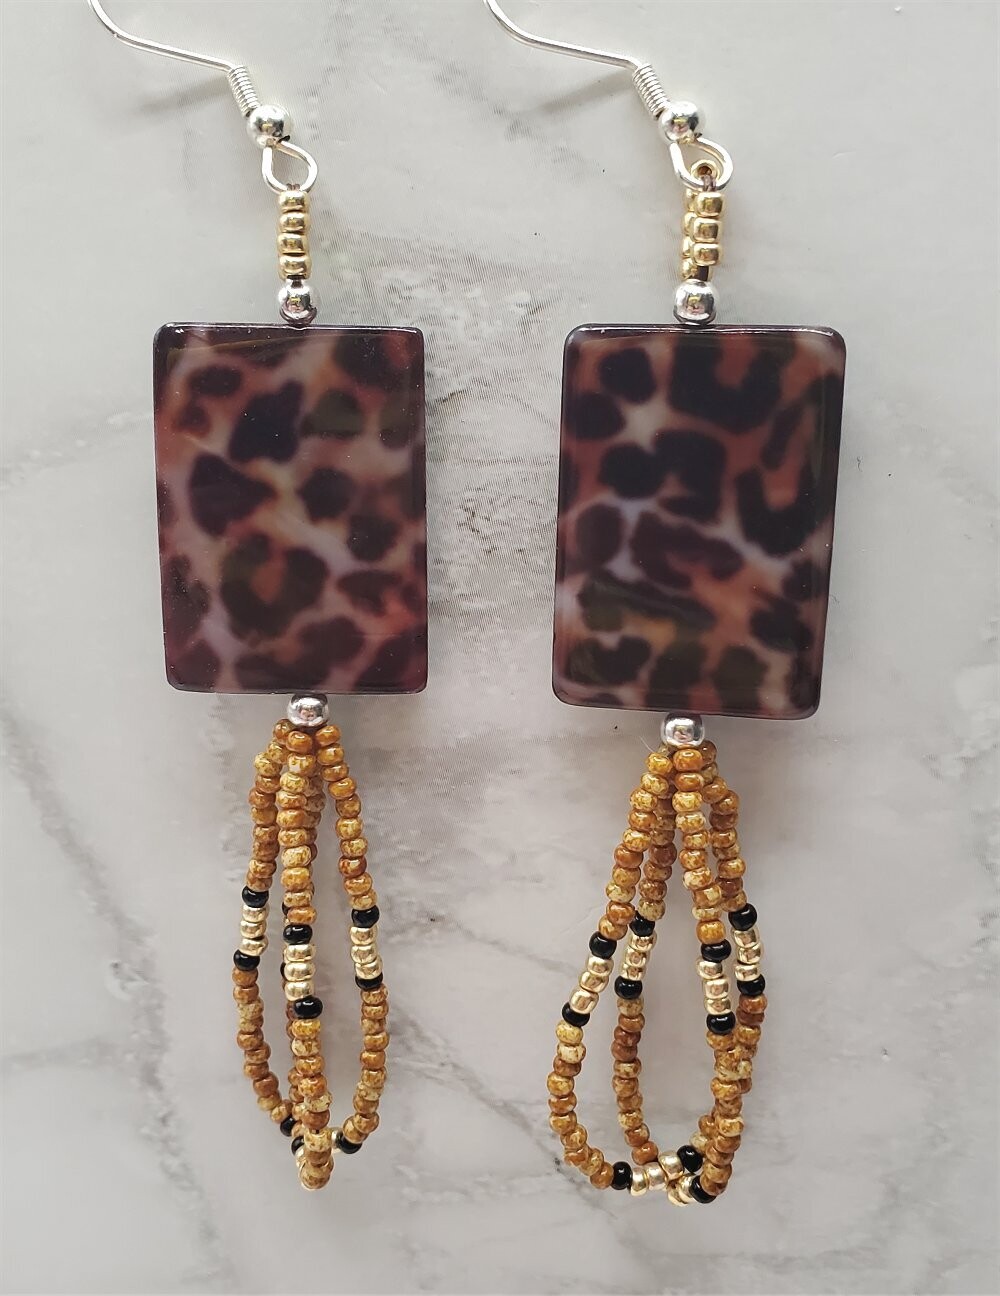 Leopard Print Shell Earrings with Seed Bead Dangles